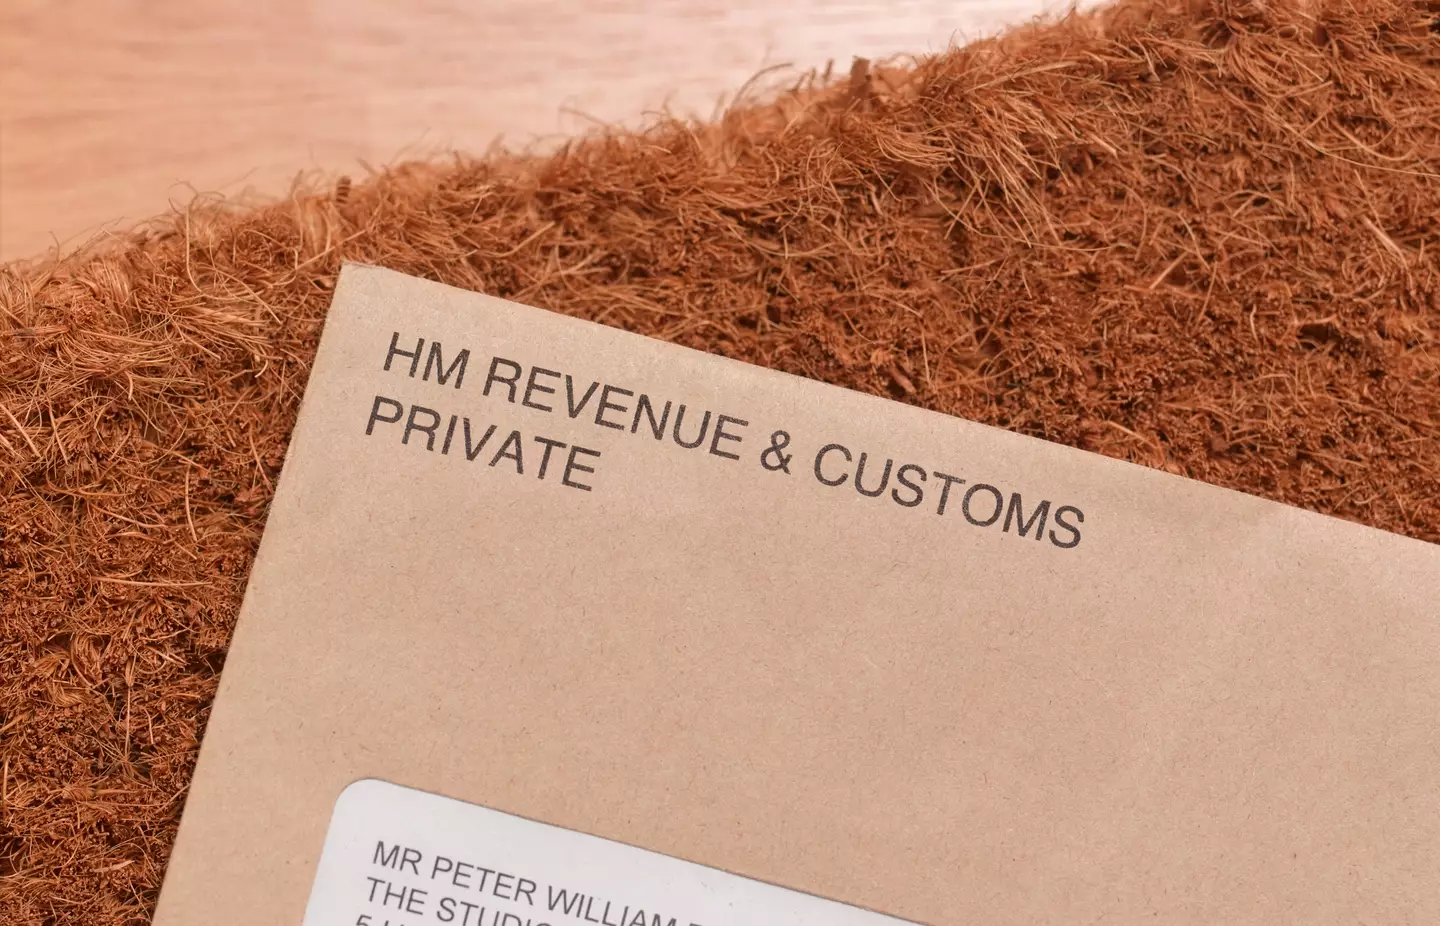 Fraudsters are posing as HMRC to con Brits out of their hard earned cash.